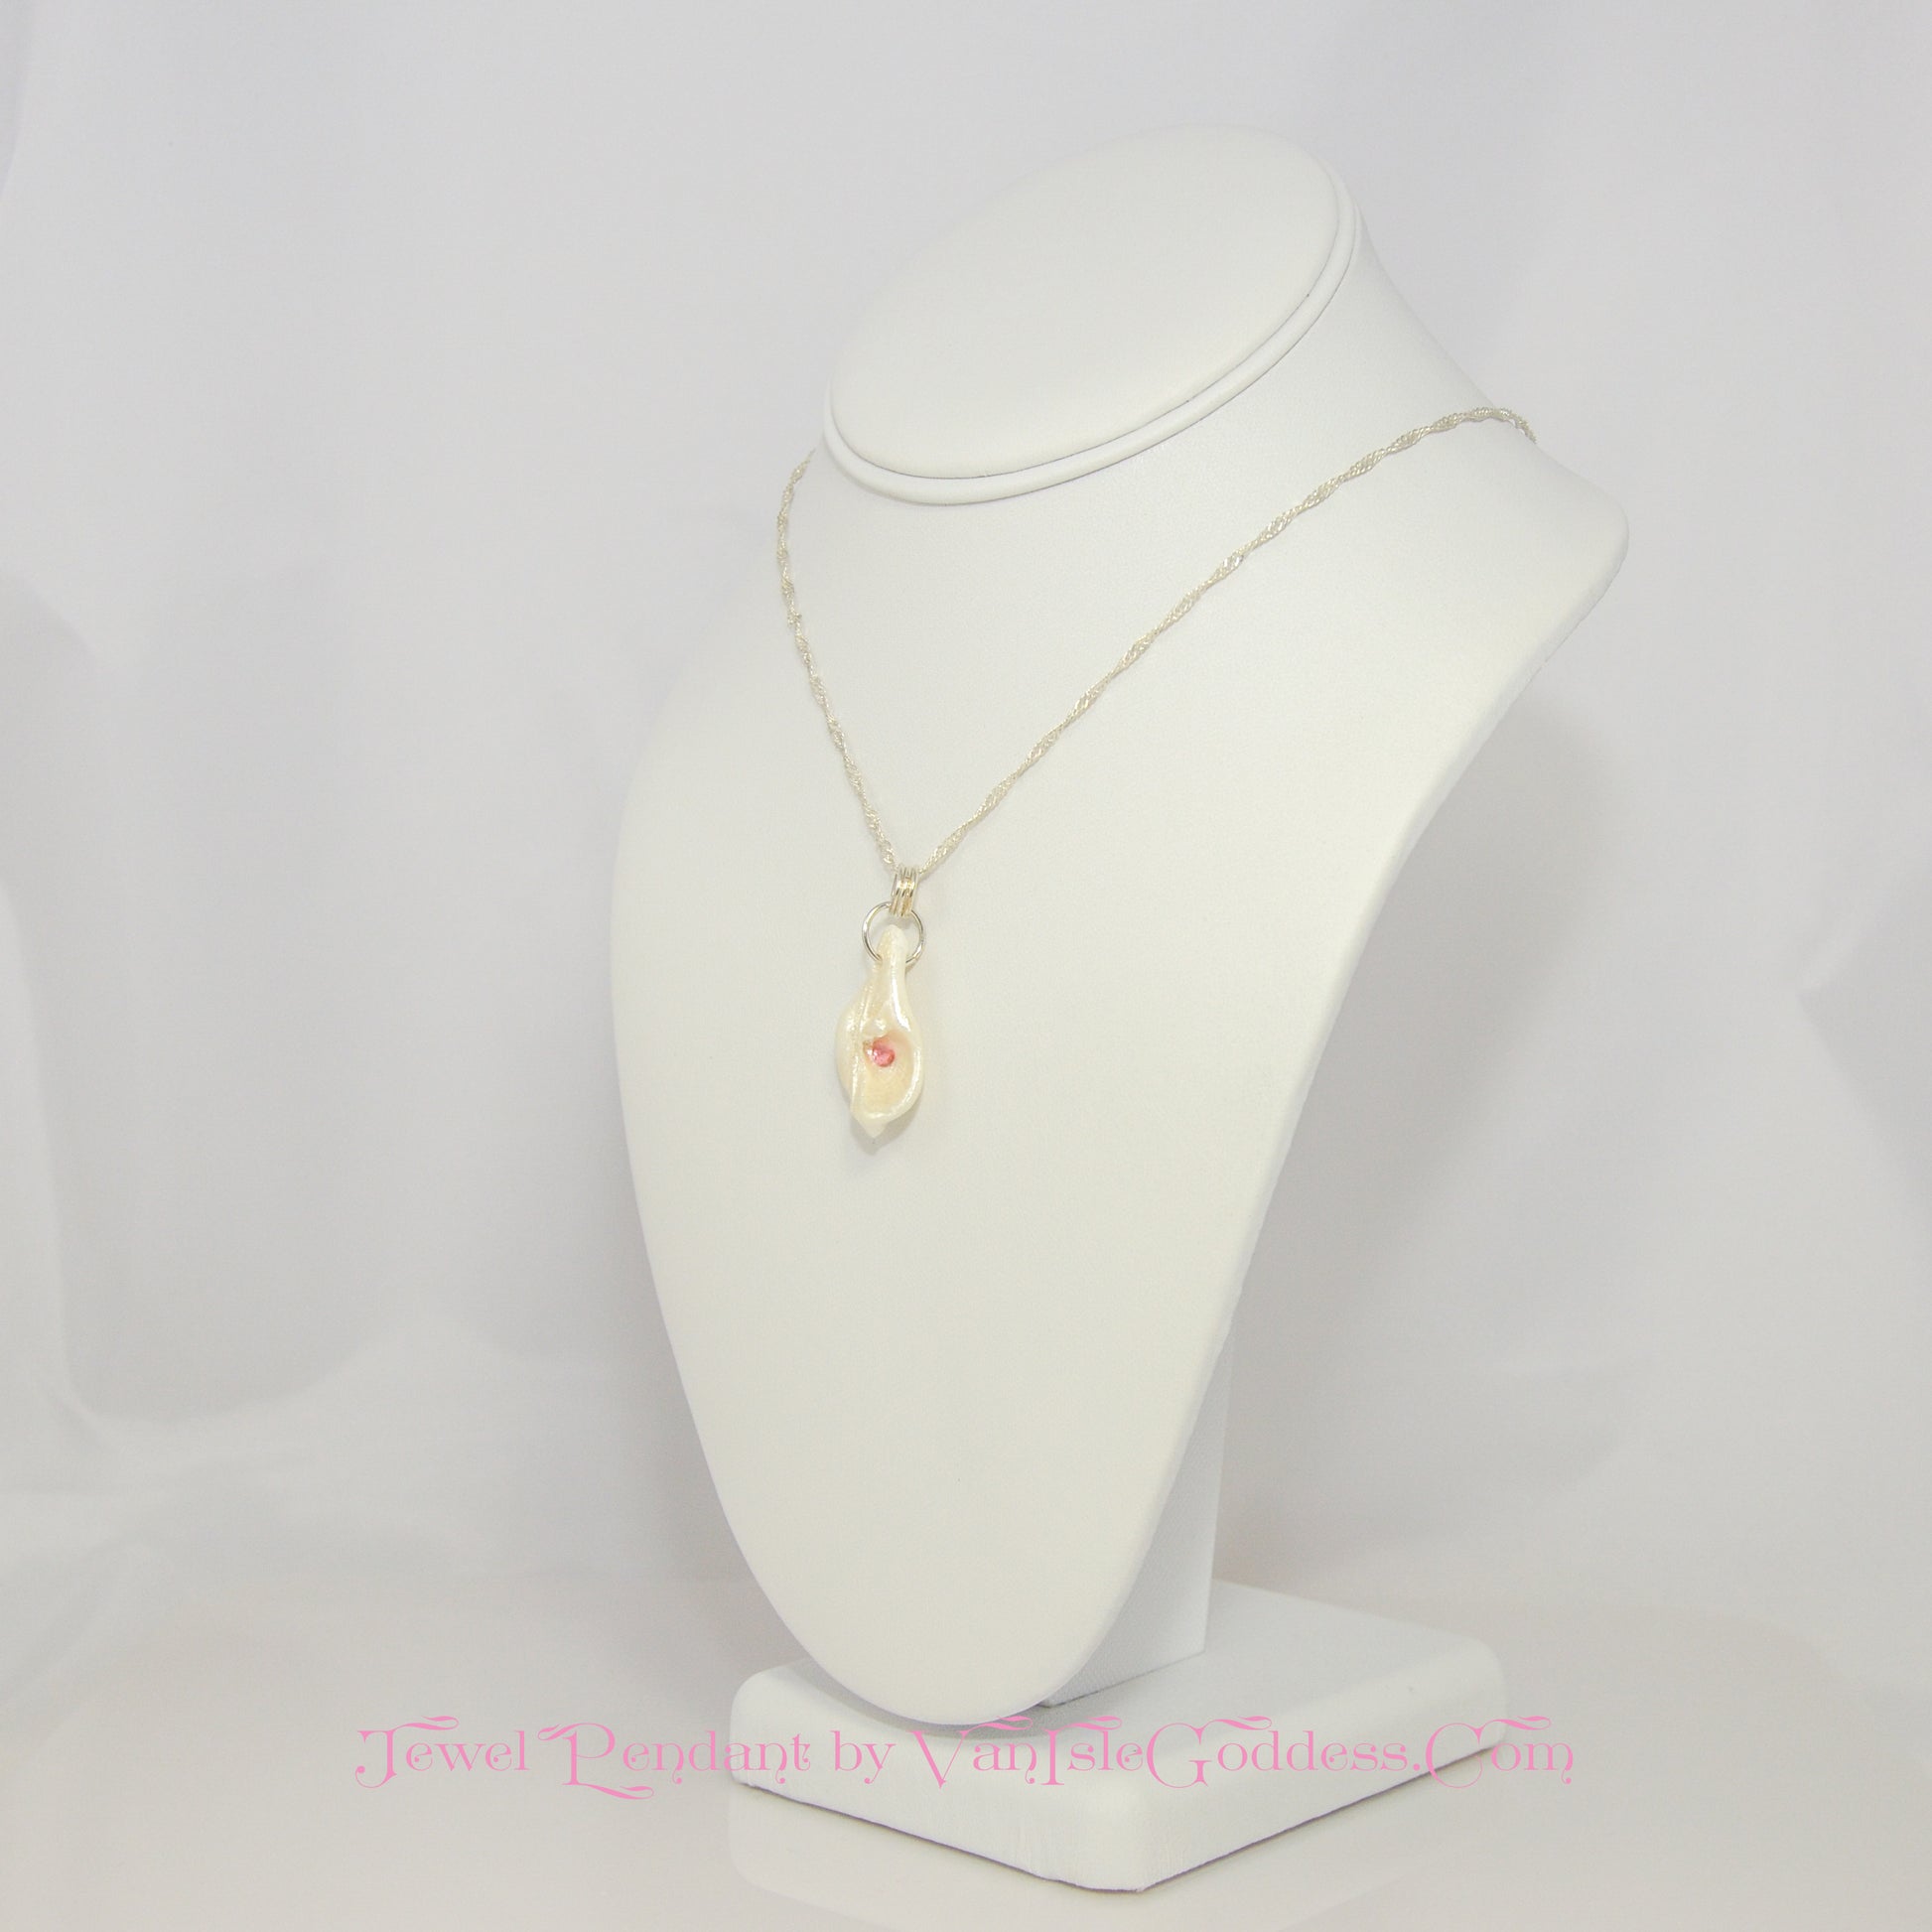 Jewel natural seashell with a real teardrop shaped rose cut pink tourmaline gemstone compliments the pendant. The pendant is shown so the viewer can see the left side of the pendant.